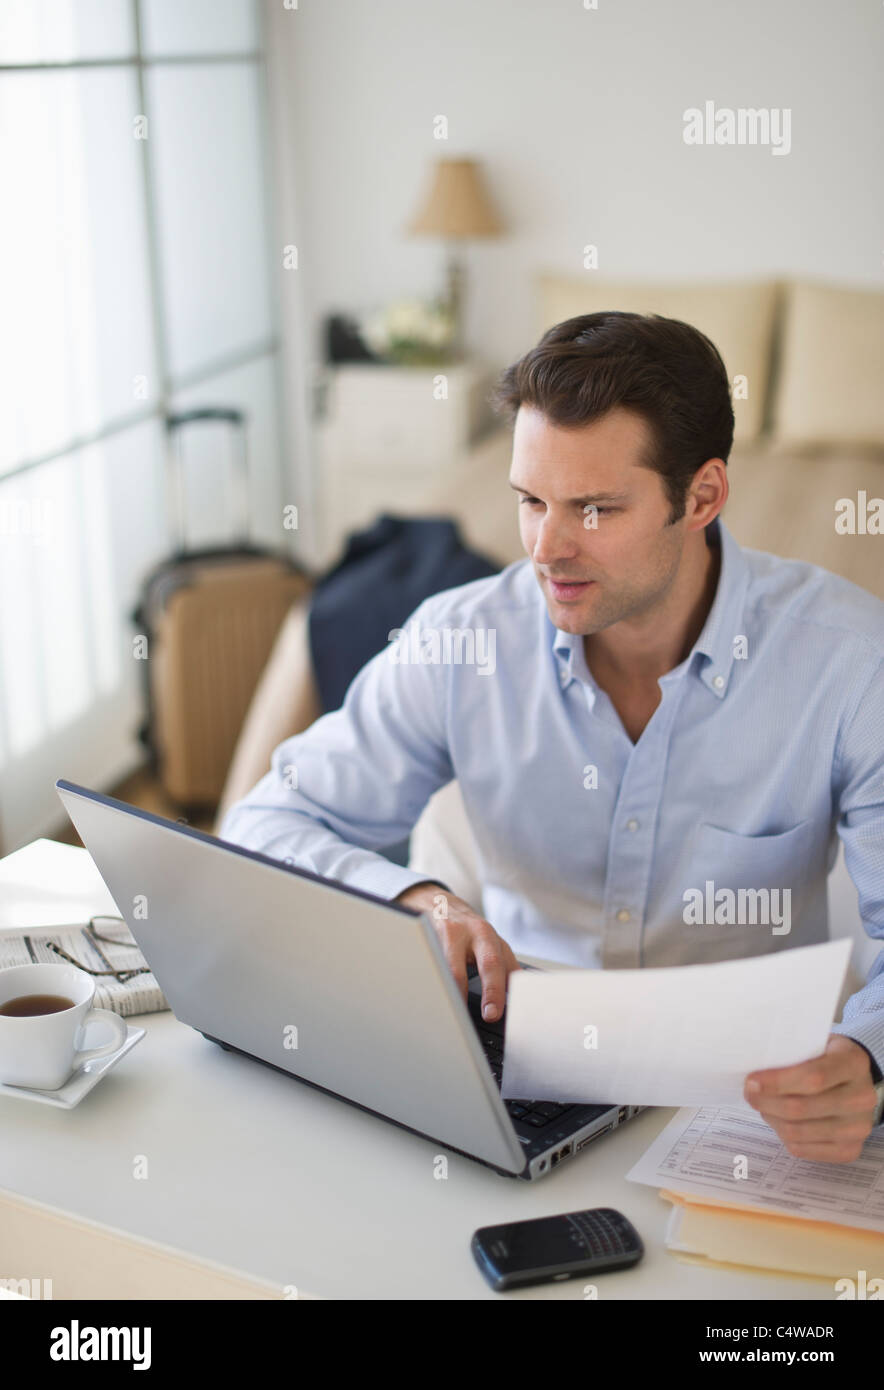 USA,New Jersey,Jersey City,man using laptop at home office Stock Photo